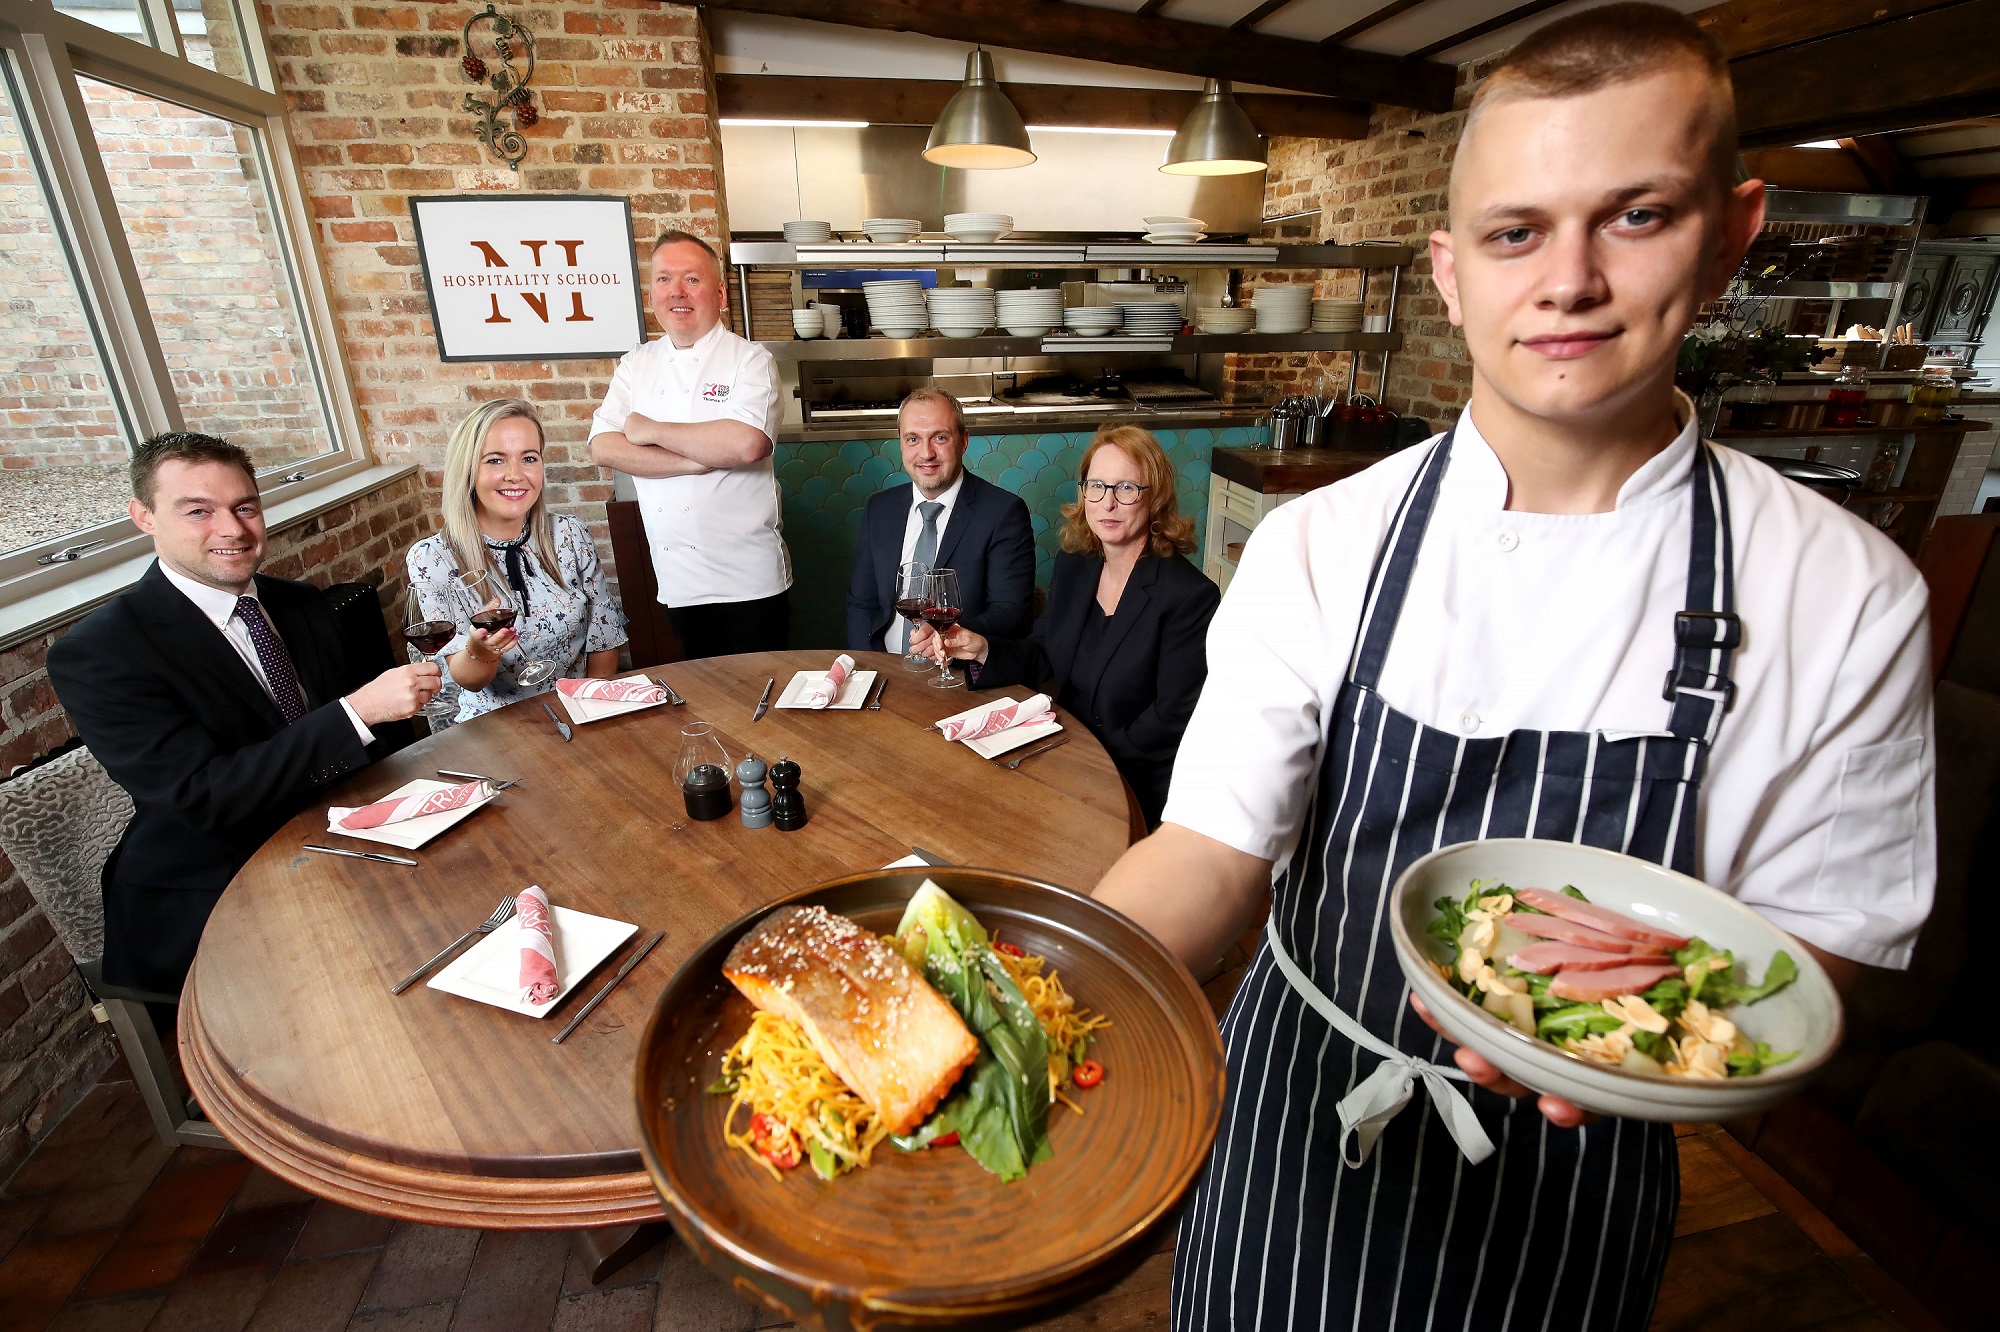 New chef course to offer guaranteed hotel jobs